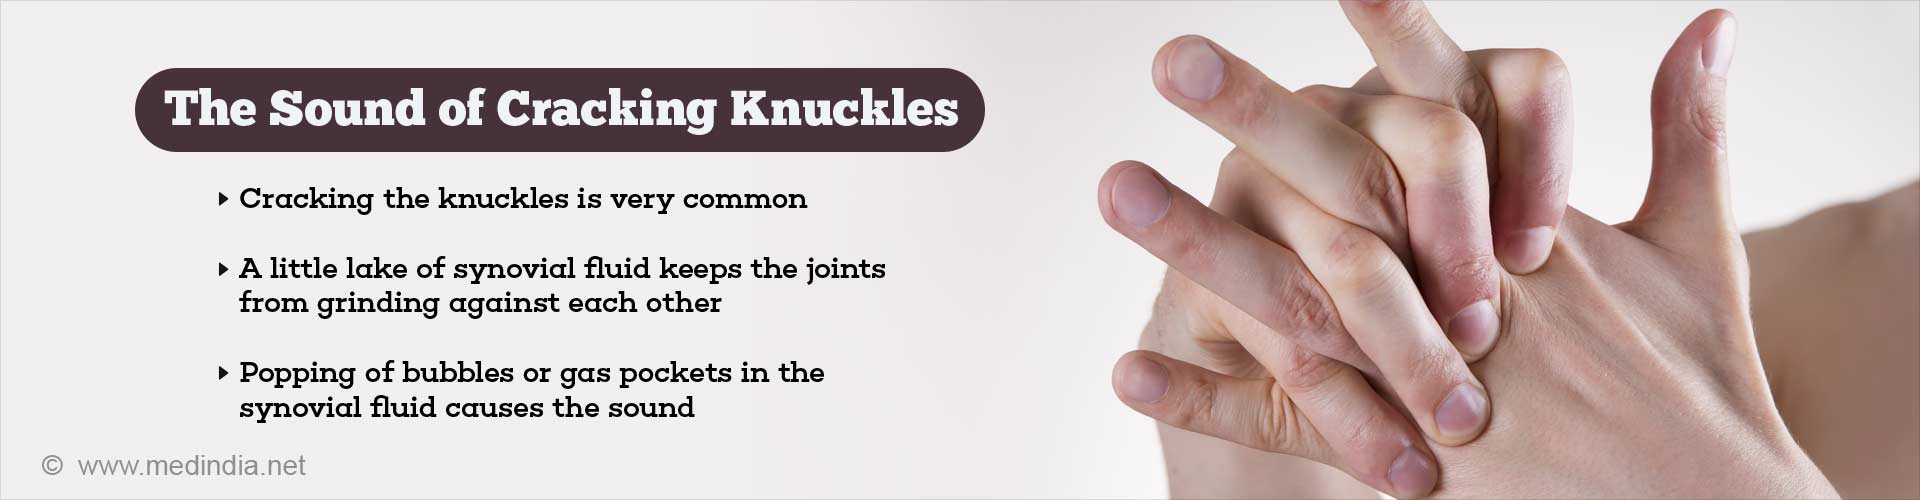 The sound of cracking knuckles
- cracking the knuckles is very common
- a little lake of syovial fluid keeps the joints from grinding against each other
- popping of bubbles or gas pockets in the synovial fluid causes the sound